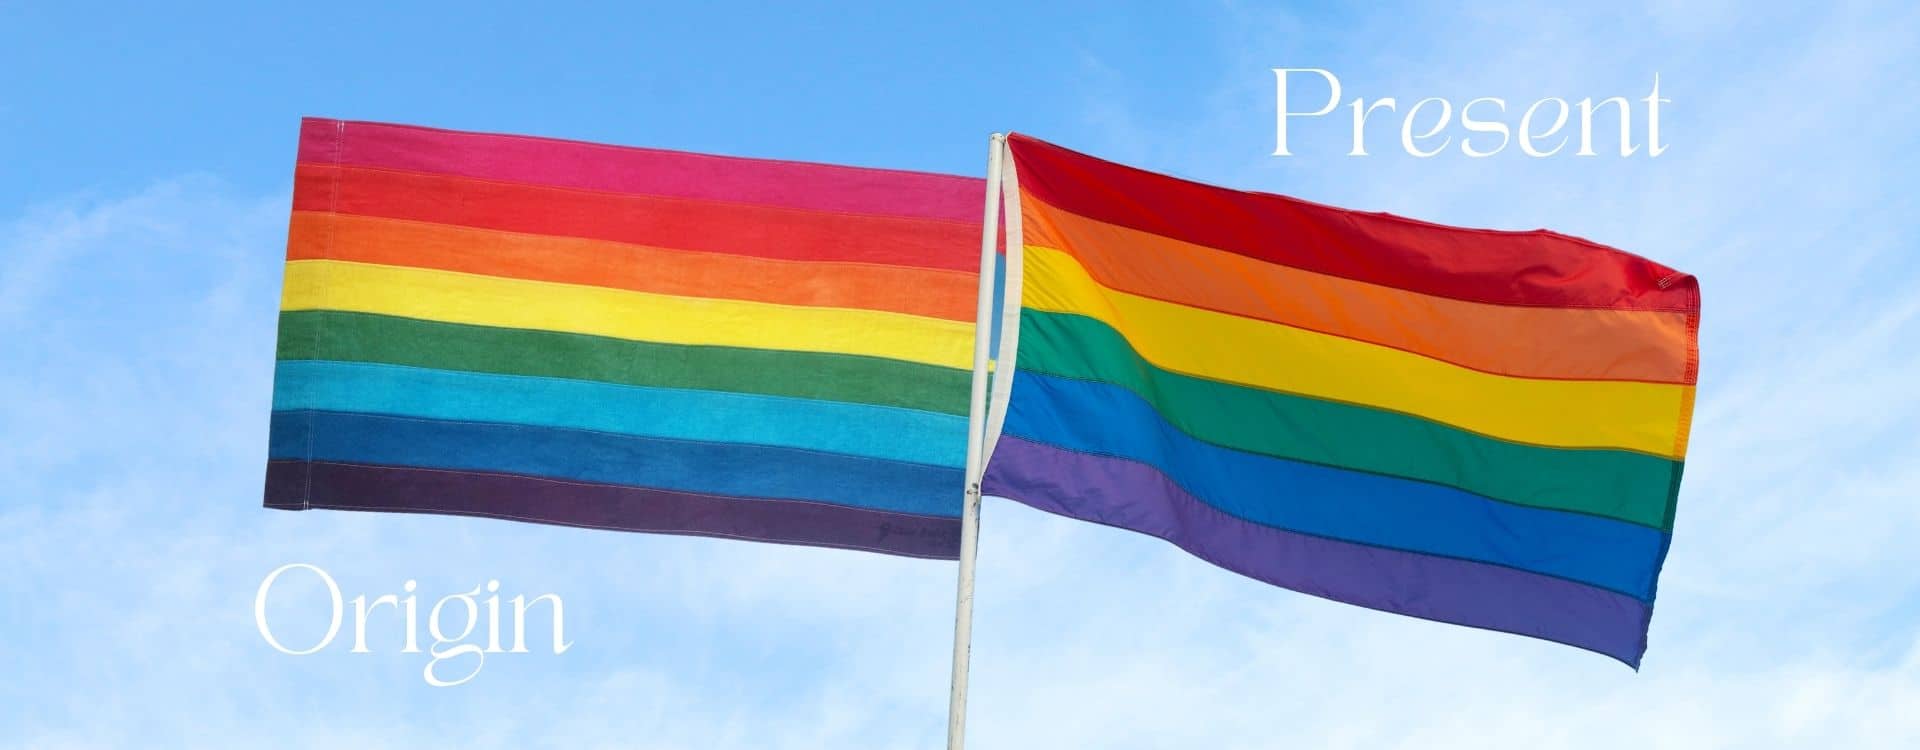 What is the rainbow flag?